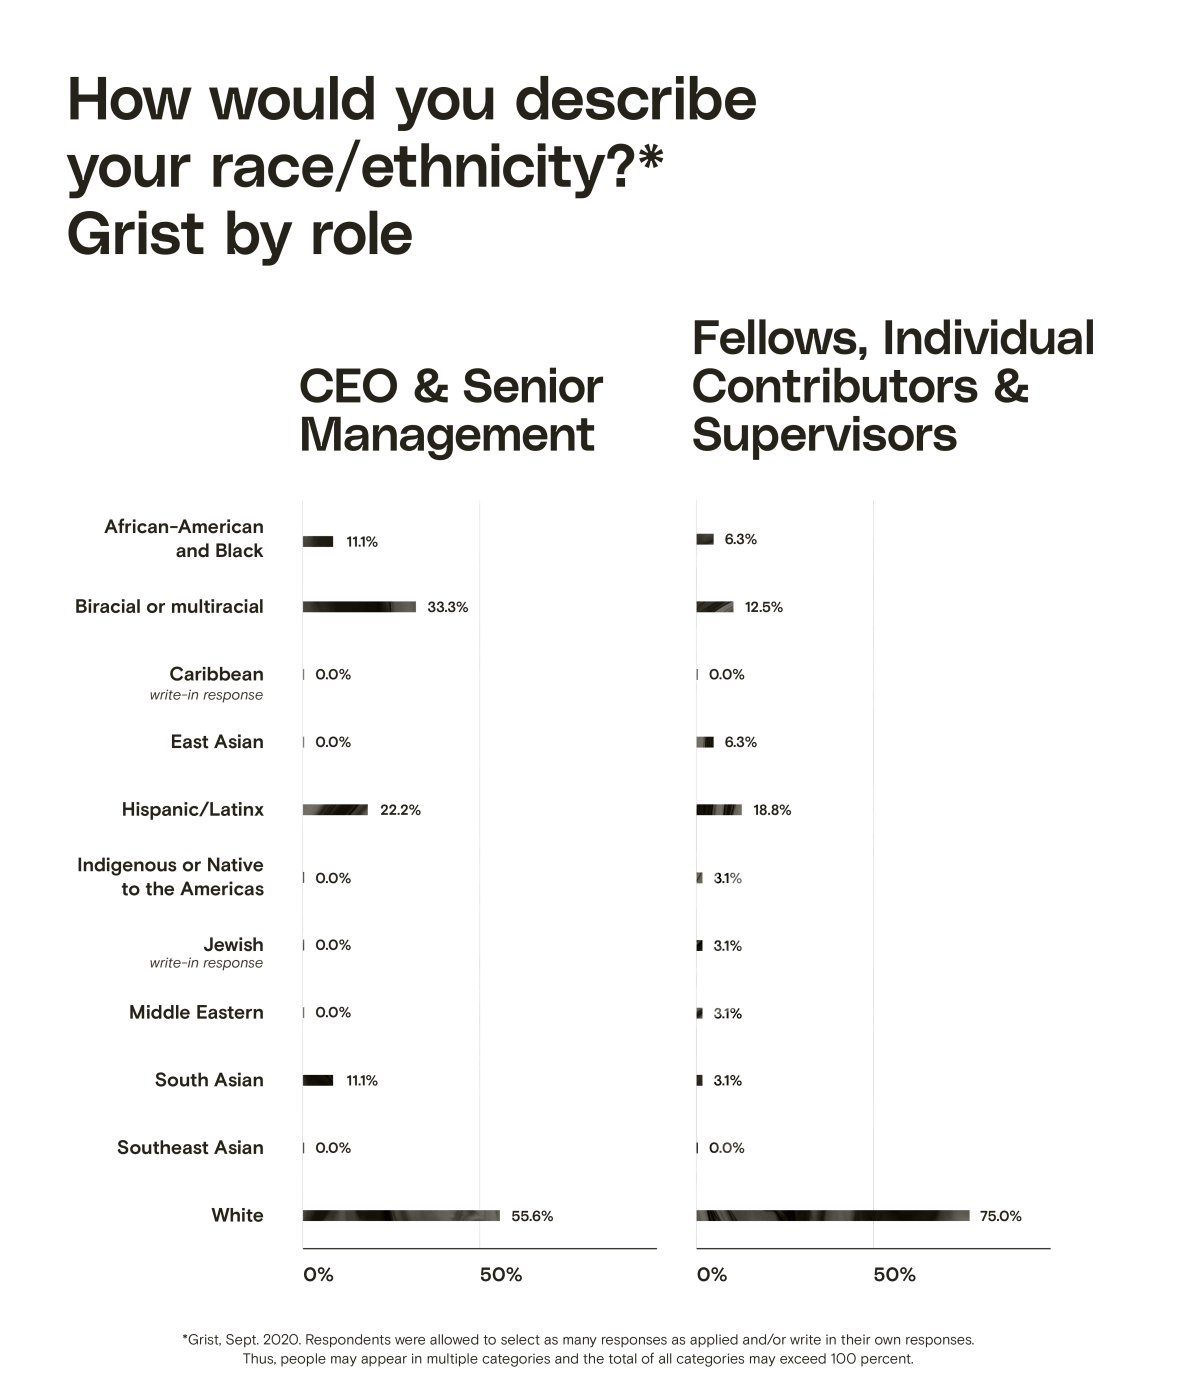 A bar chart showing race/ethnicity at Grist by role. In the CEO & Senior Management category, the three largest groups are White (55.6%), Biracial or multiracial (33.3%), and Hispanic/Latinx (22.2%). In the Fellows, Individual Contributors & Supervisors category, the three largest groups are White (75%), Hispanic/Latinx (18.8%), and Biracial or multiracial (12.5%).